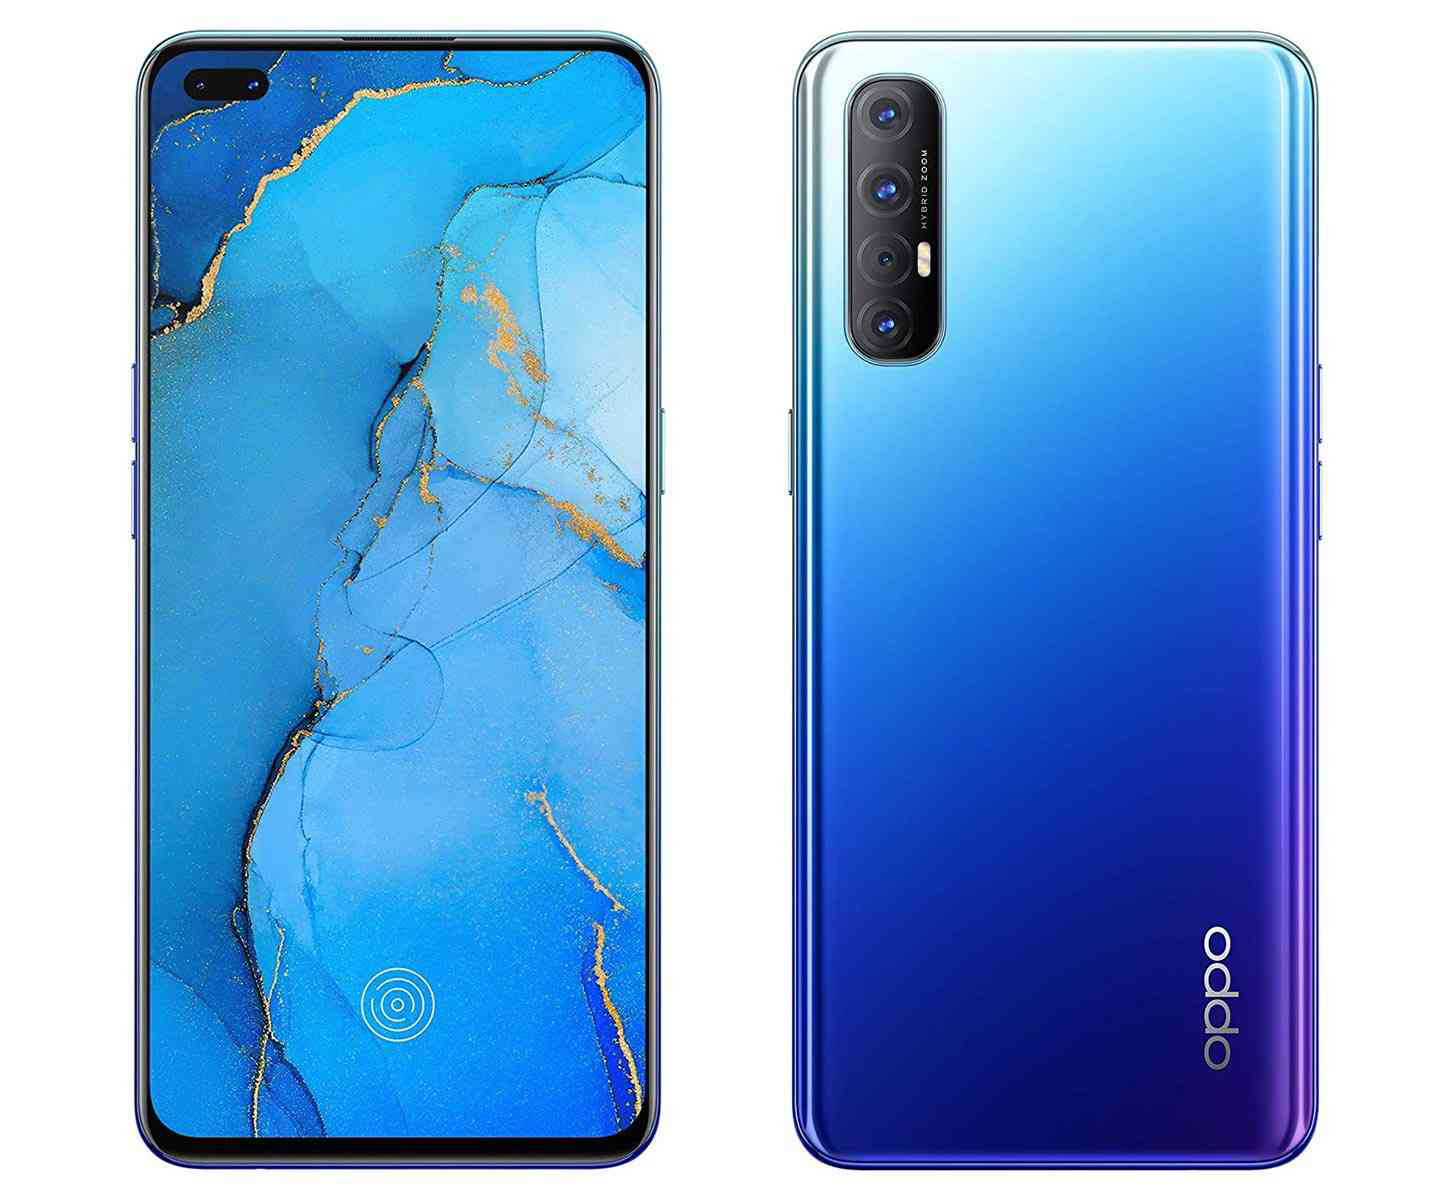 Oppo Reno3 Pro Phone Specifications And Price – Deep Specs